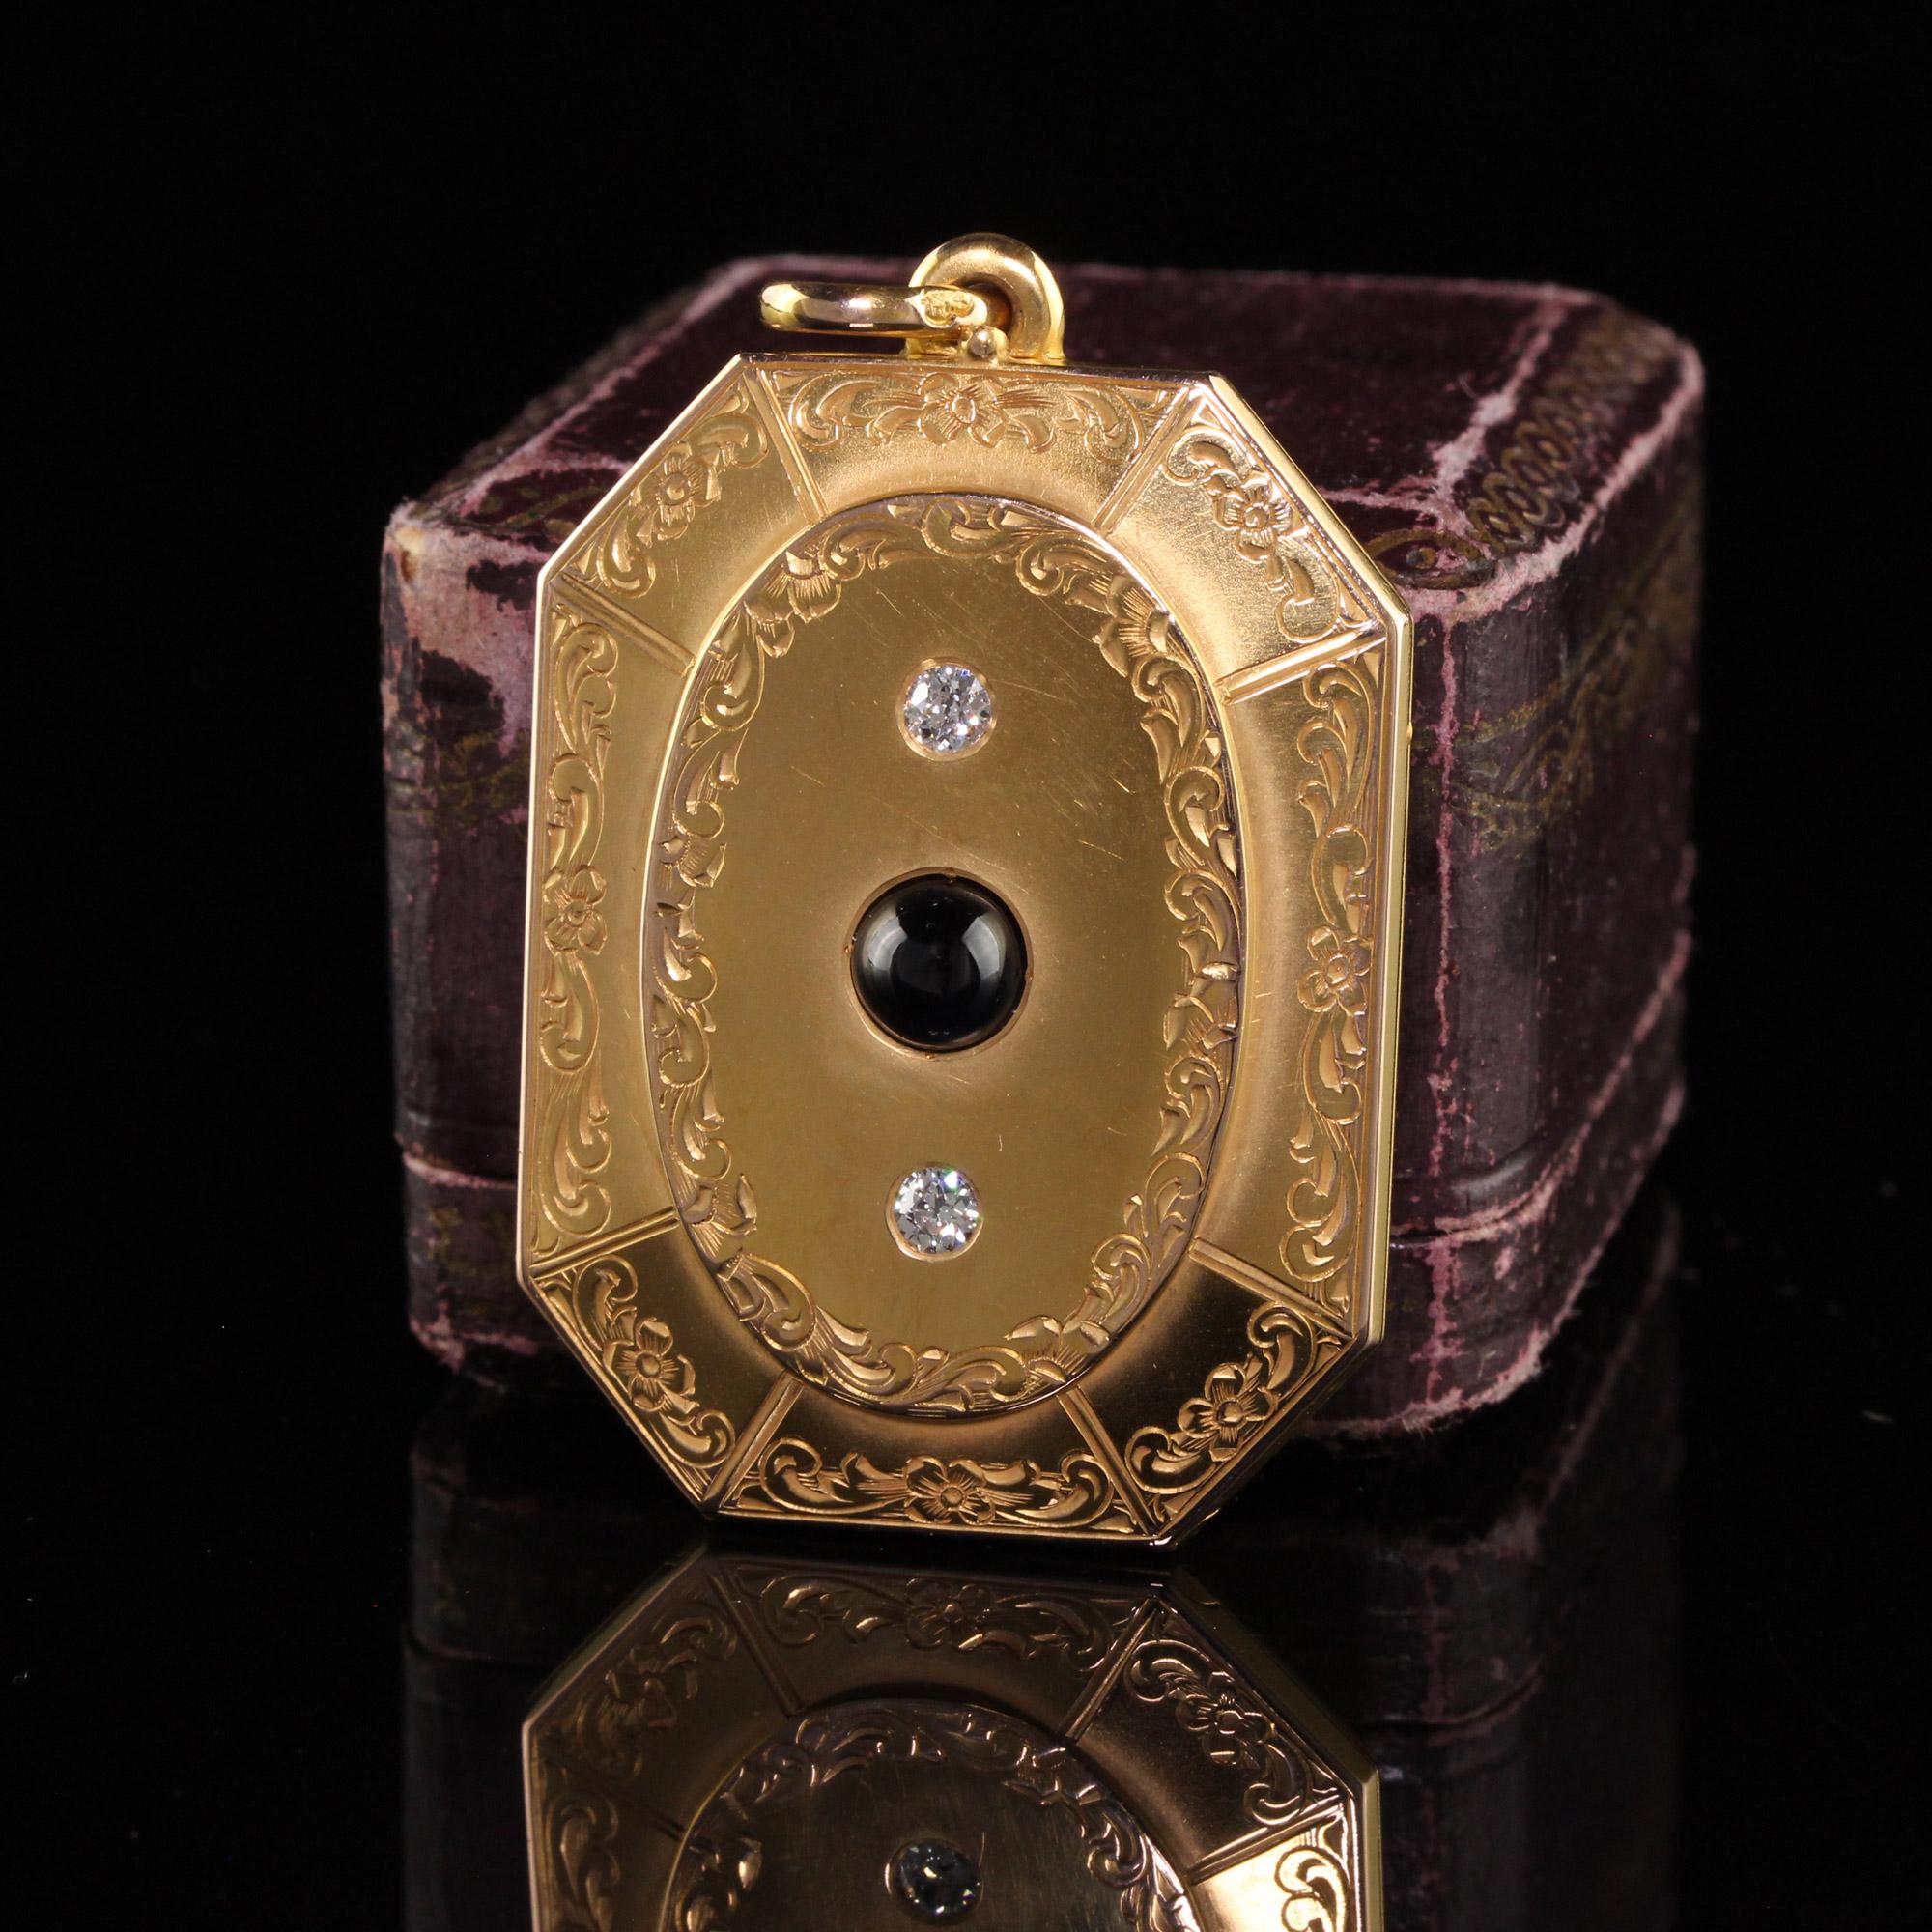 Beautiful Antique Victorian 18K Yellow Gold Old Euro Diamond and Sapphire Locket Pendant. This incredible locket is crafted in 18k yellow gold. The center holds a natural cabochon sapphire and has old european cut diamond above and below it. The